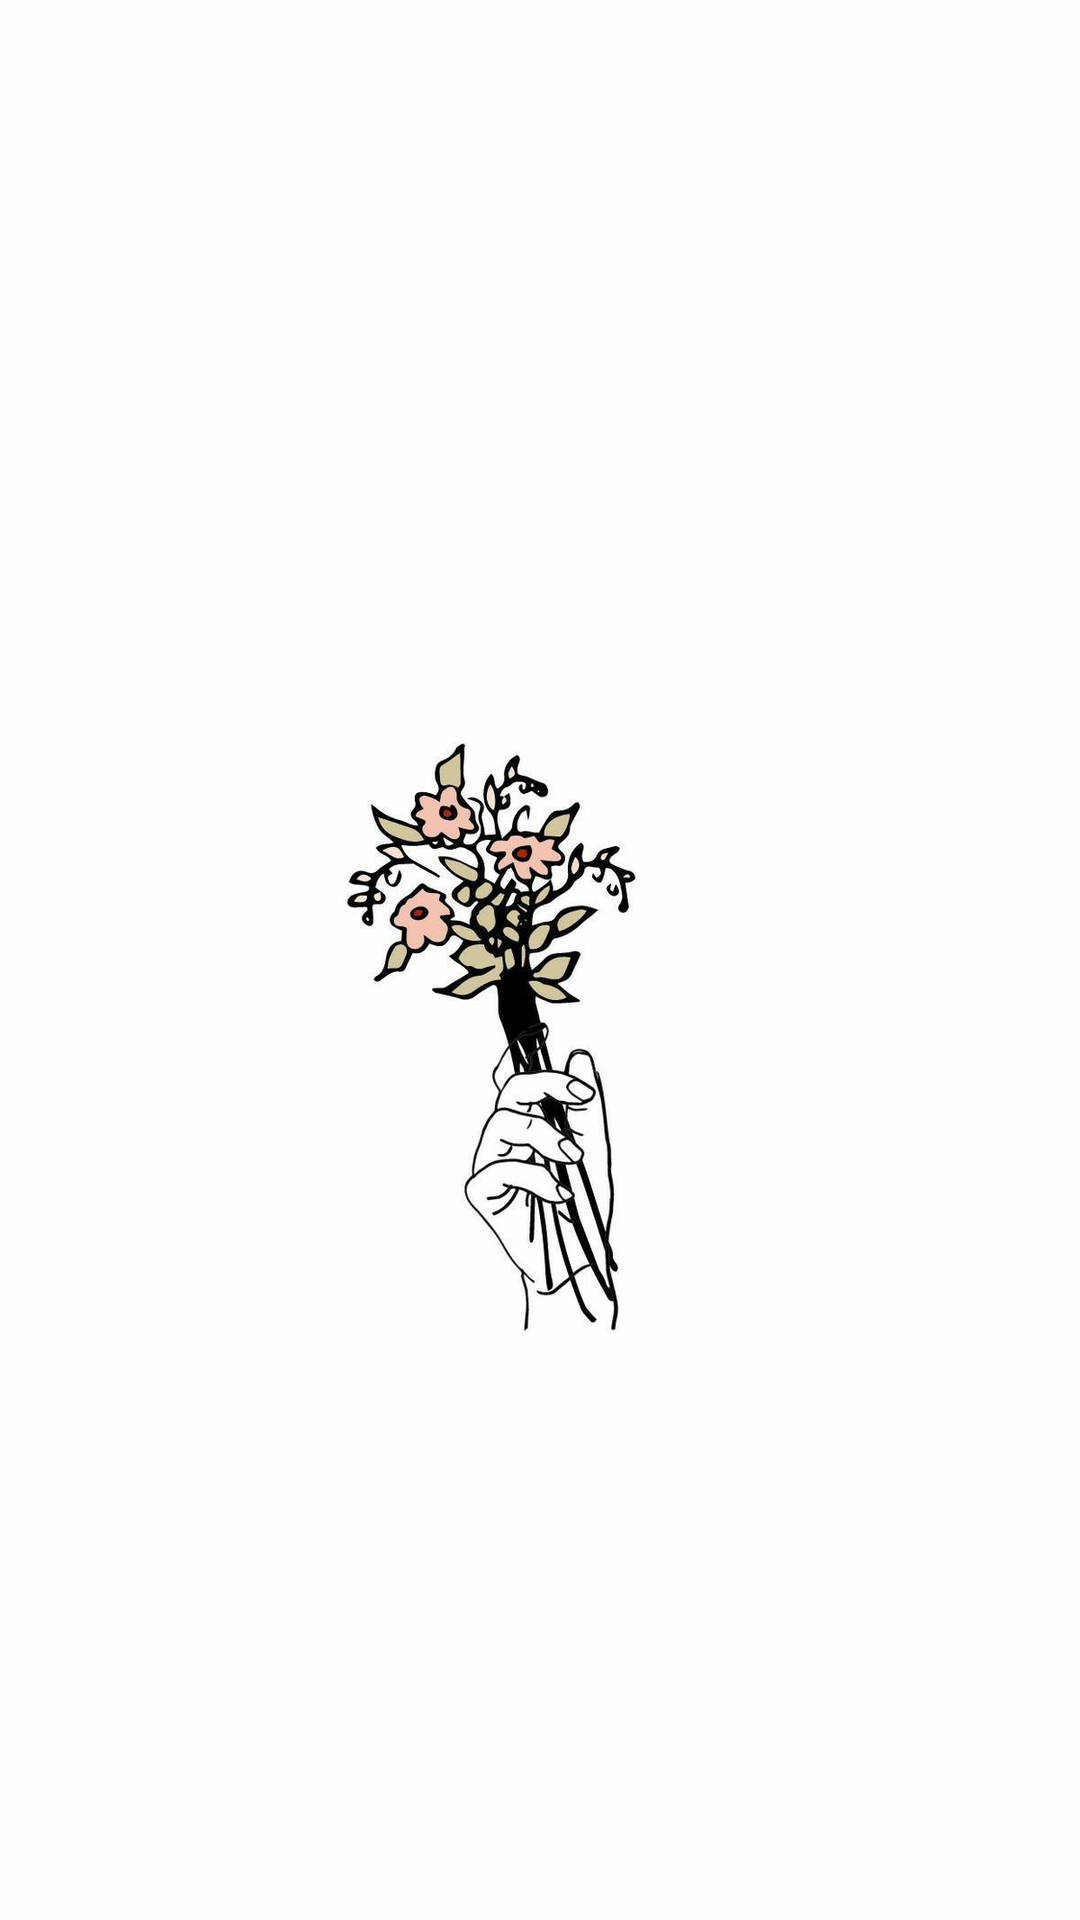 Hand Holding Flowers Aesthetic Sketches Wallpaper